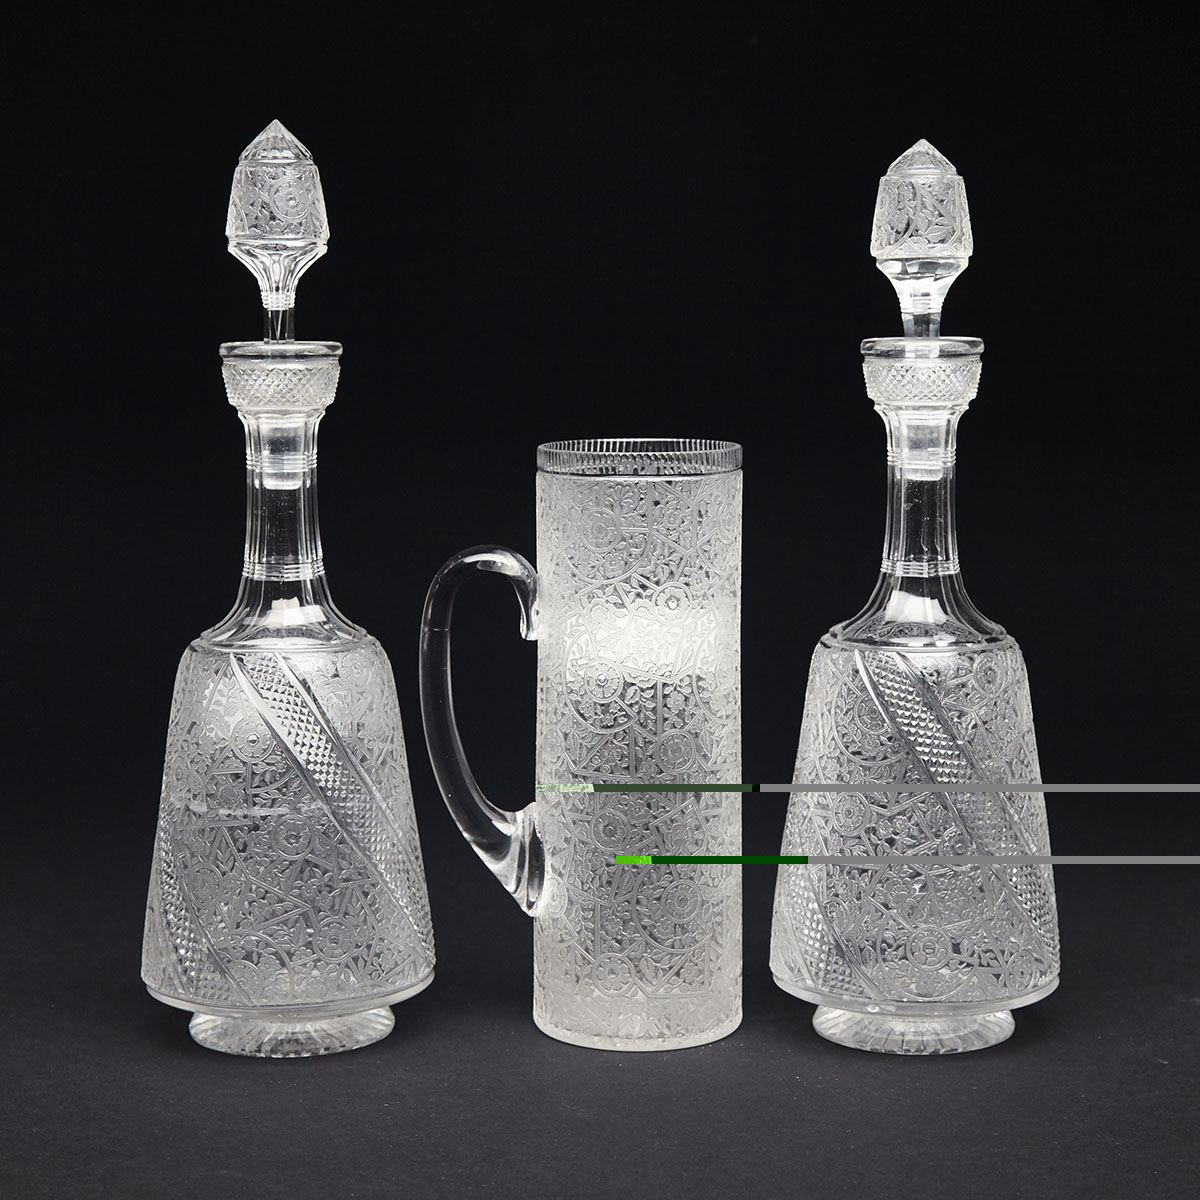 Pair of Grice Bros. Cut and Etched Glass Decanters and a Jug, 1880s